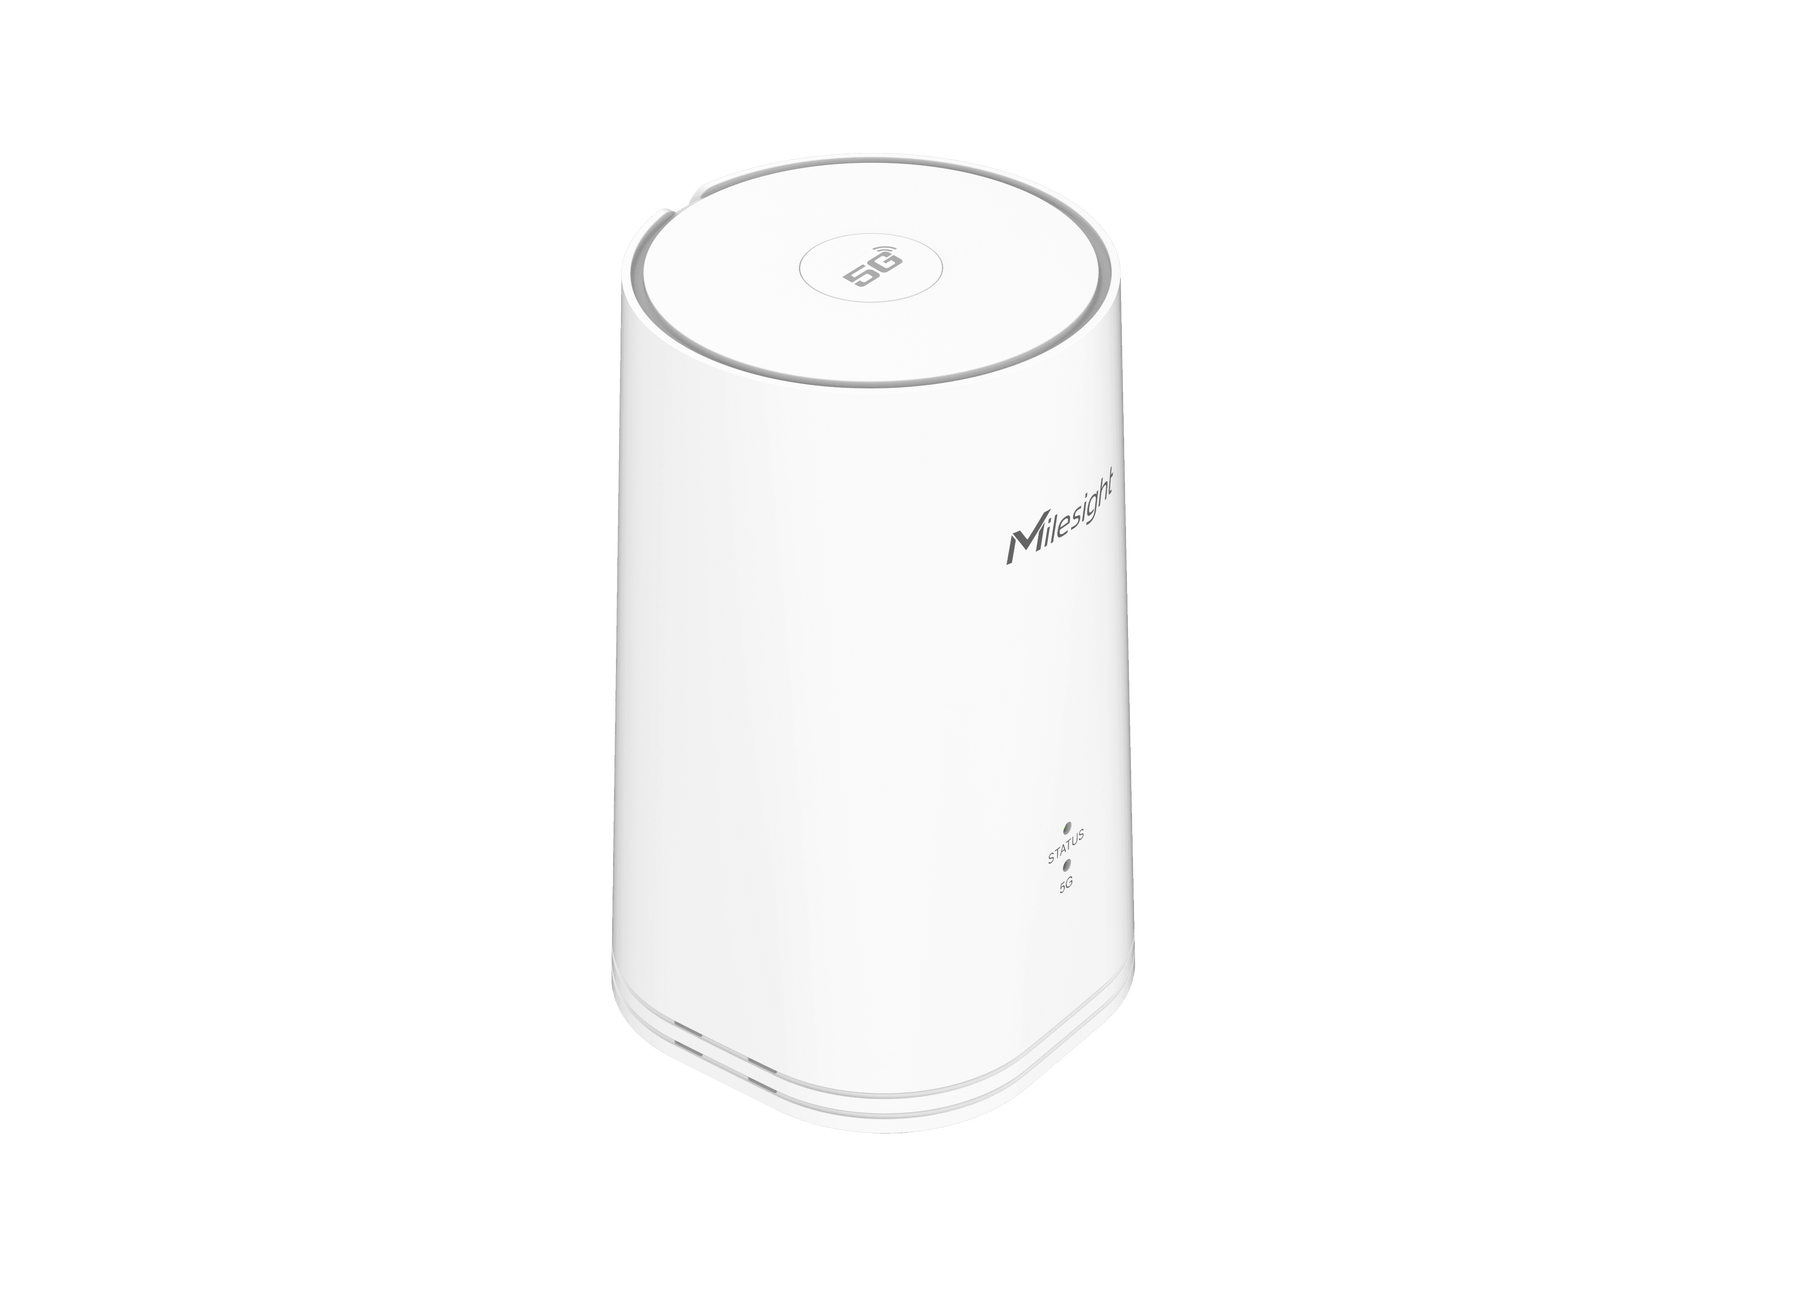 UF51 5G Cellular Router - 3